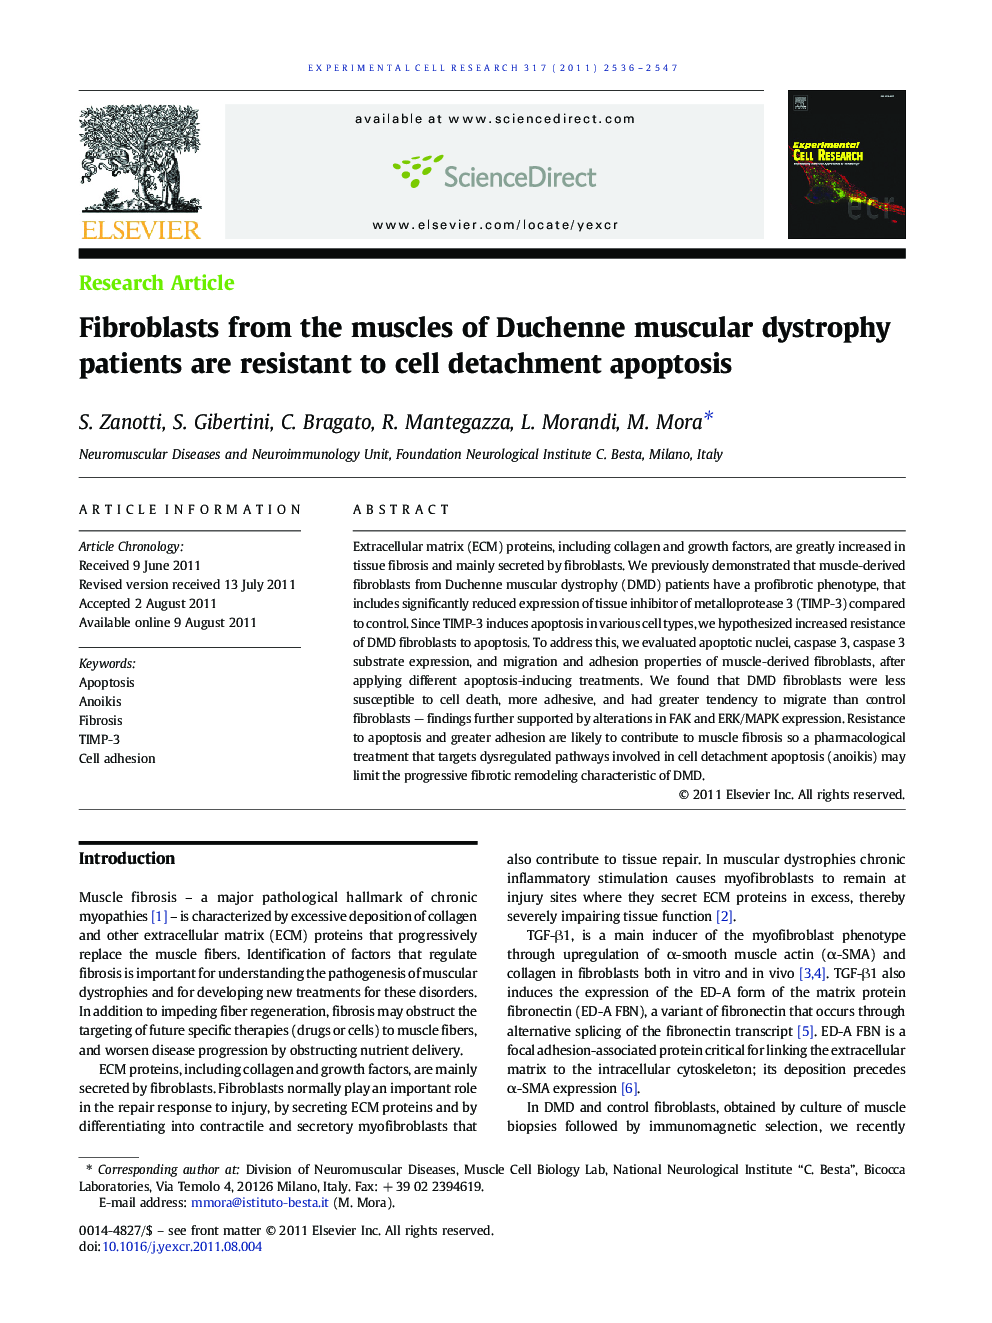 Fibroblasts from the muscles of Duchenne muscular dystrophy patients are resistant to cell detachment apoptosis